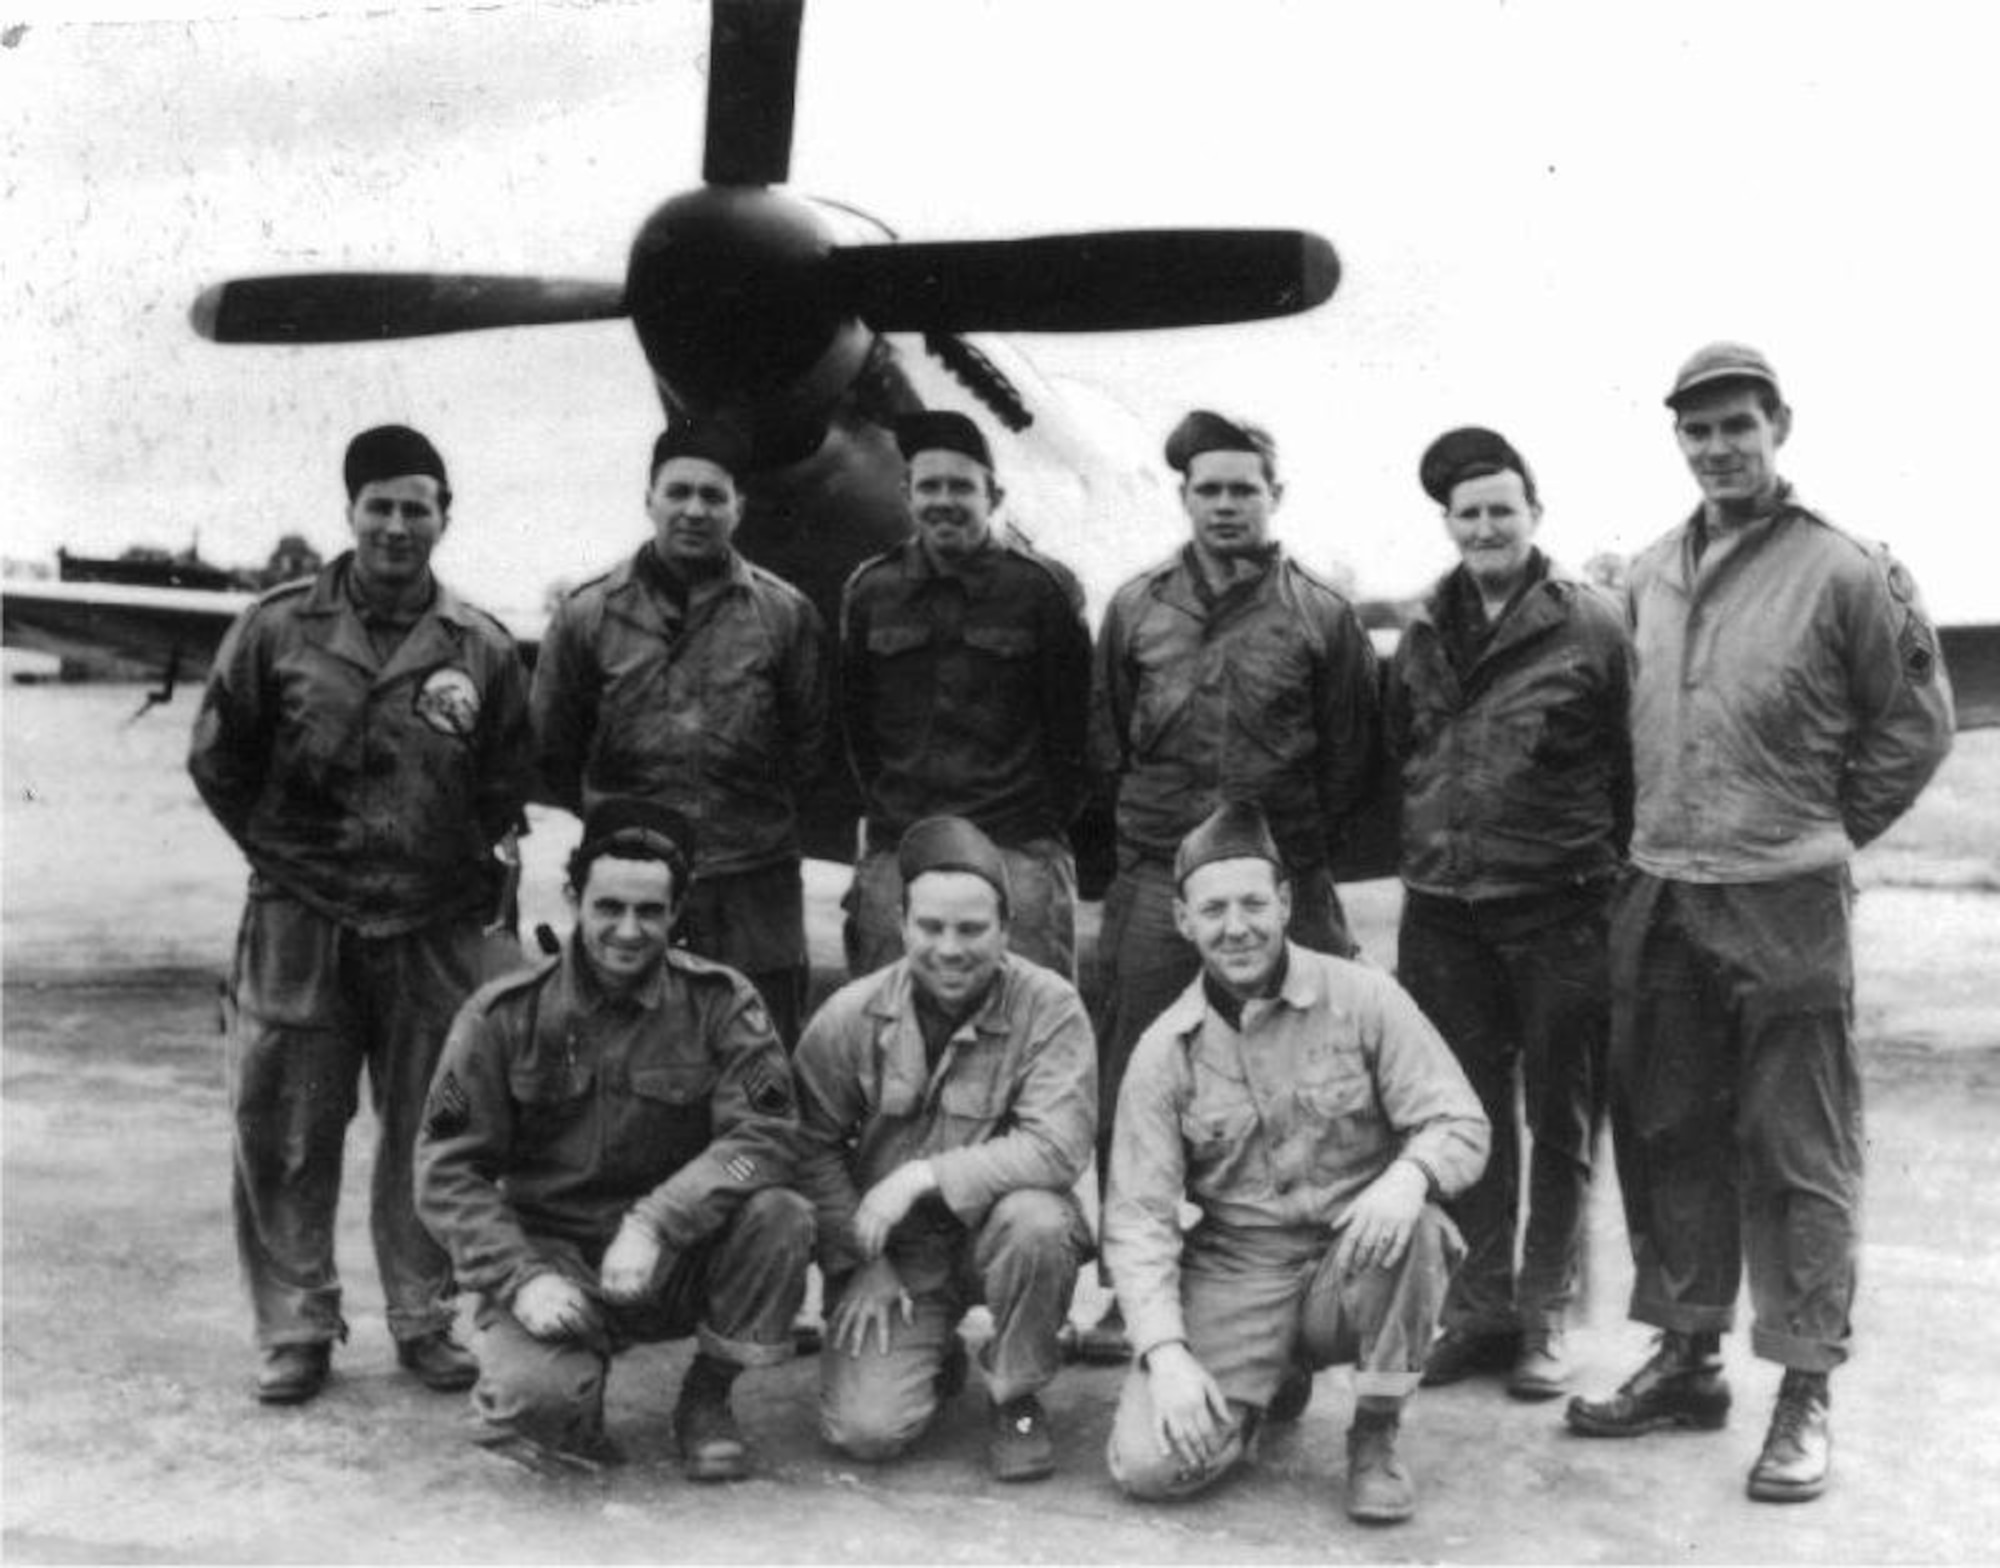 Neil Buley was one of the OreANG's early aircraft maintenance Caretakers, and a World War II Army Air Force veteran who served in the European Theater of Operations.  He is pictured here during the war along with other members of the 14th Photo Reconnaissance Squadron's Engineering Section and a P-51D Mustang fighter, added to the unit late in the war as an escort for its unarmed photo recon planes.  Left to right, kneeling are: S/Sgt. Sylvan Saul; T/Sgt. Shade B Kincer; T/Sgt. Edward W Nelson. Standing: Sgt. Arnold A Koskela; Sgt. William G Peterson; Sgt. Samuel C McKinney; Sgt. Cyril L Petty; S/Sgt. John F Campbell; T/Sgt. Neil O Buley.  (Courtesy of  Martin Kyburz, via Peter Randall, US 8th Air Force Little Friends website)